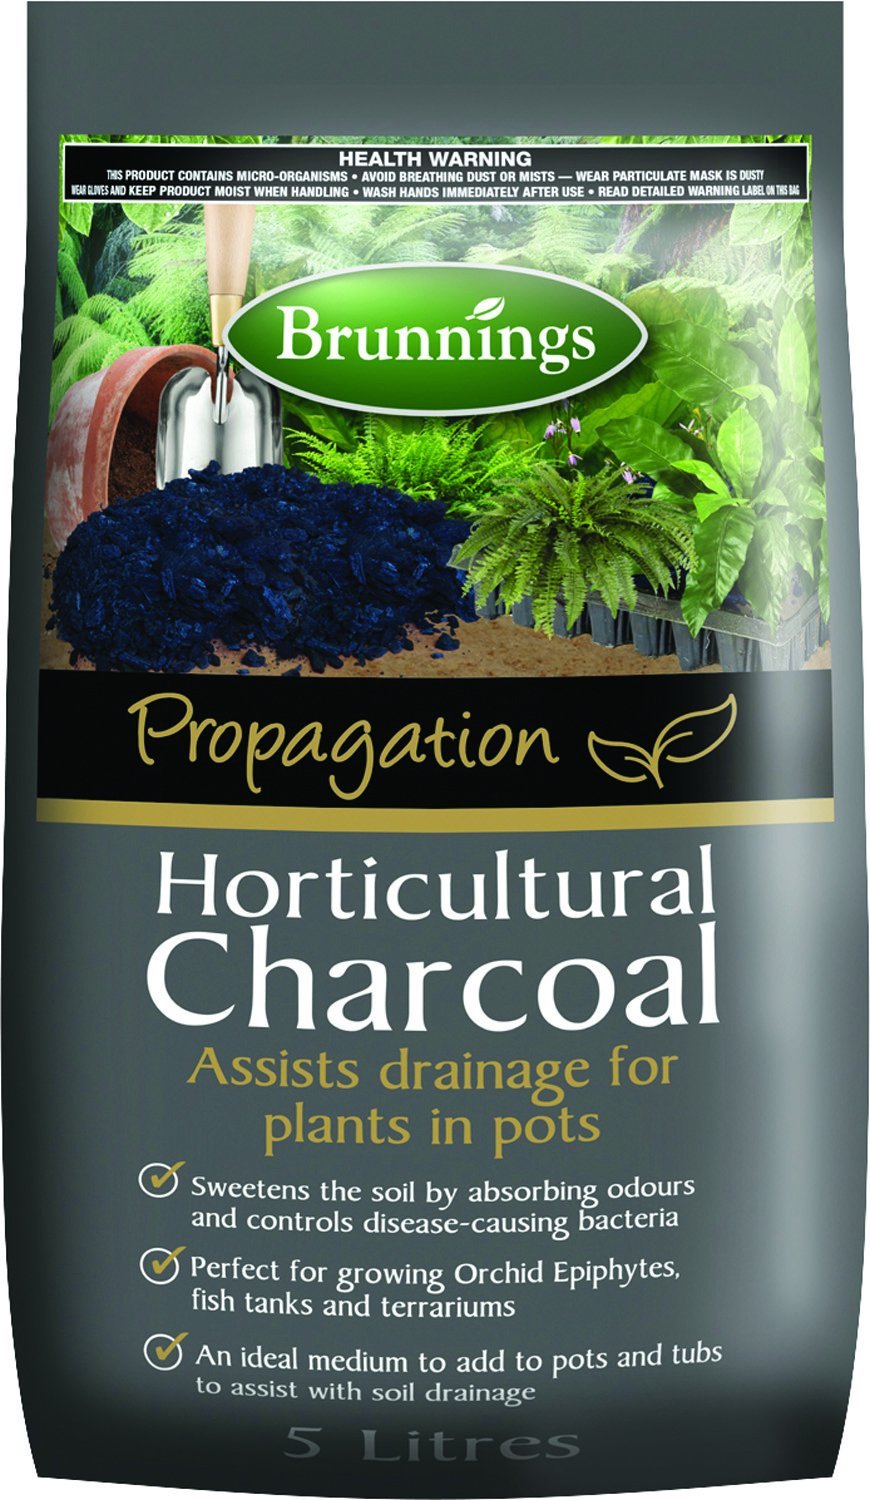 Brunnings Charcoal Horticultural 5 Litre – Woonona Petfood & Produce